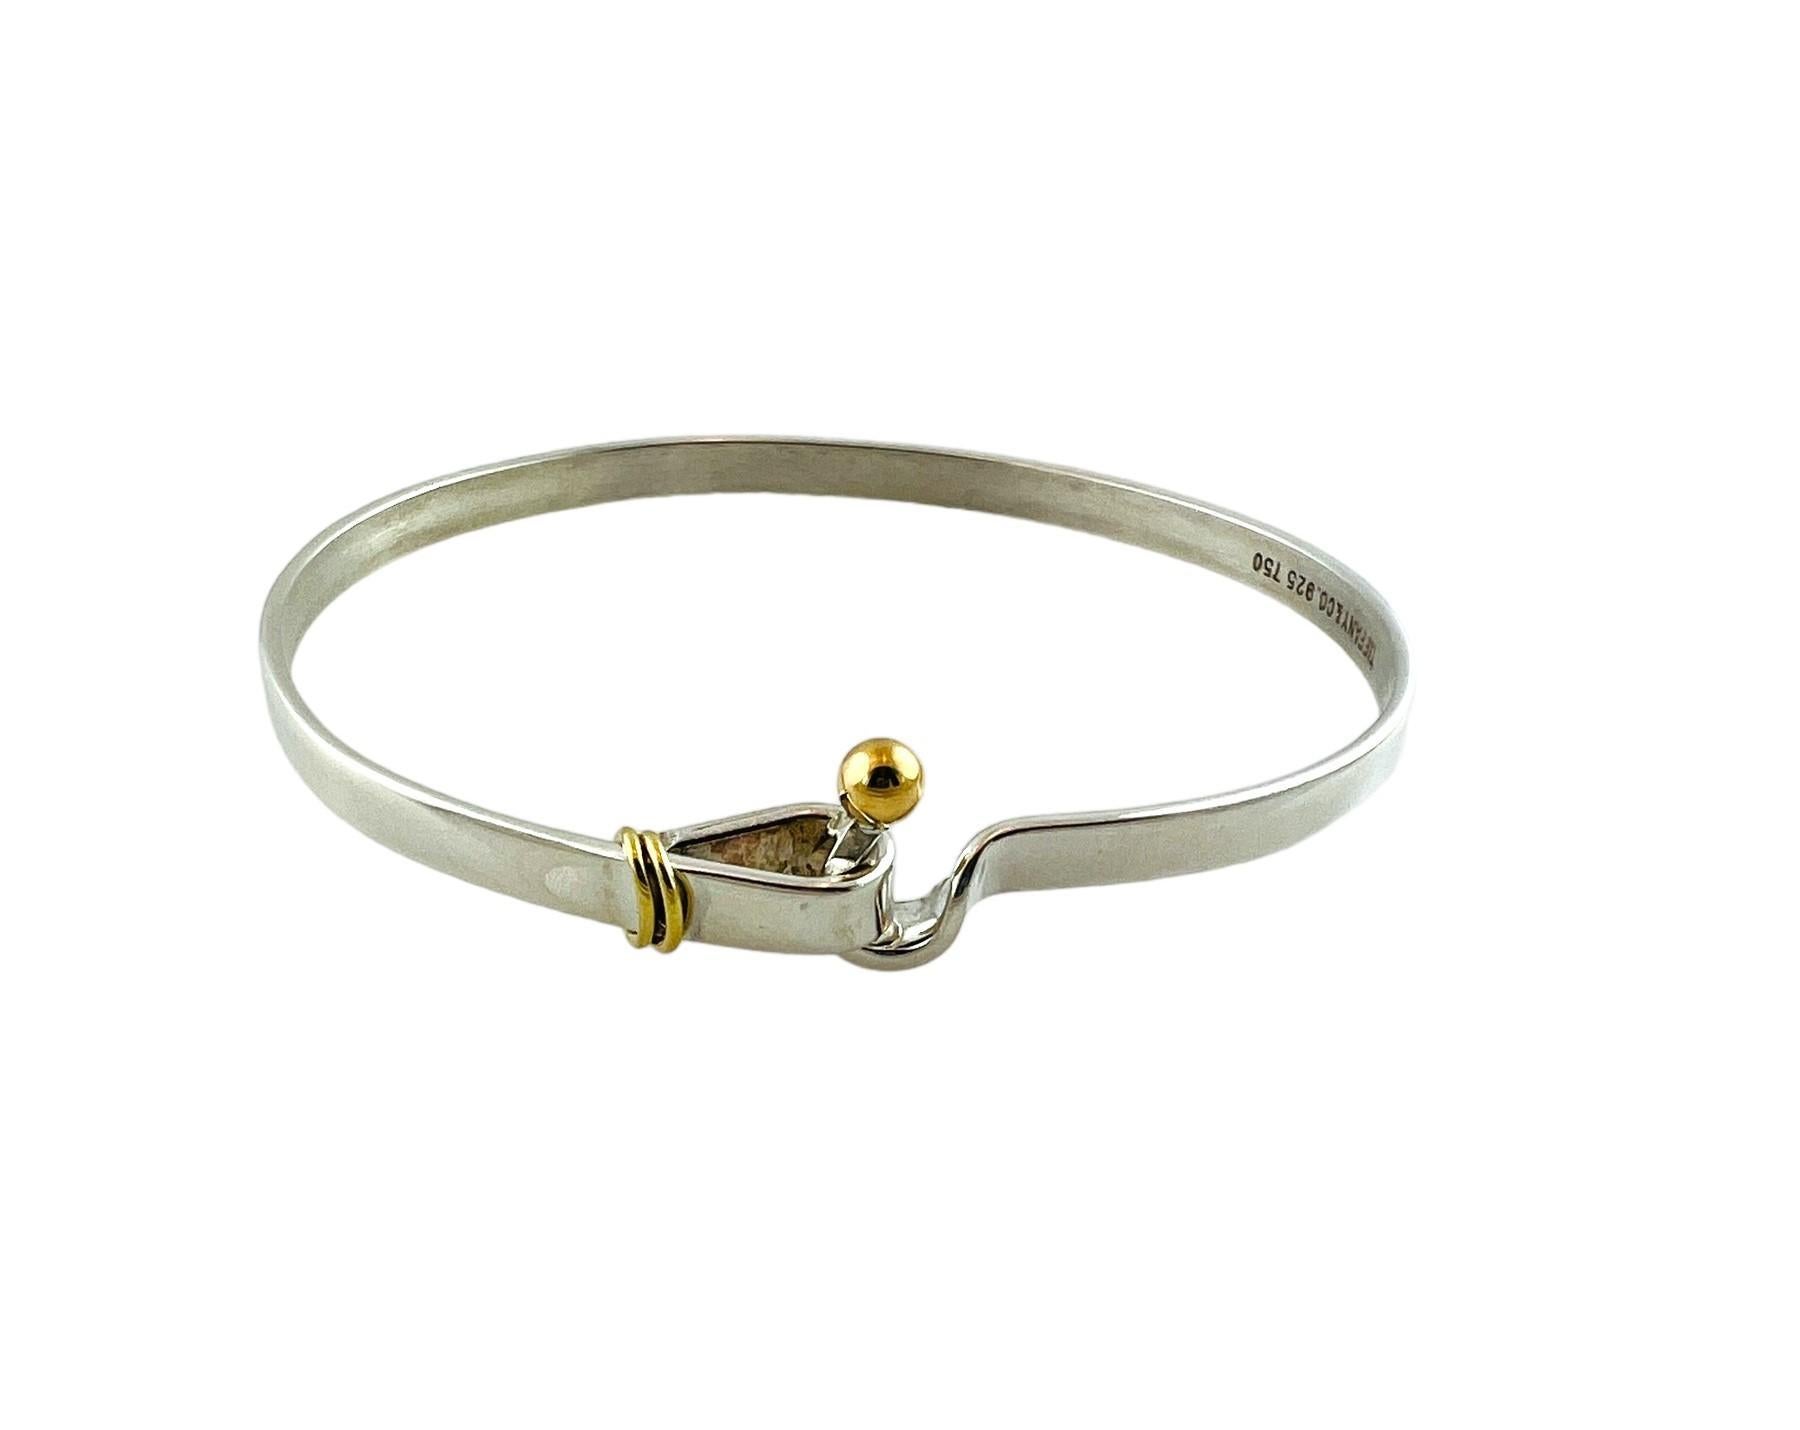 Tiffany & Co sterling silver and 18K bangle bracelet.

Authentic Tiffany sterling silver bracelet, 18K yellow gold accent bead in a hook and eye closure. Tiffany pouch and box not included.

Measures approx 6 3/4